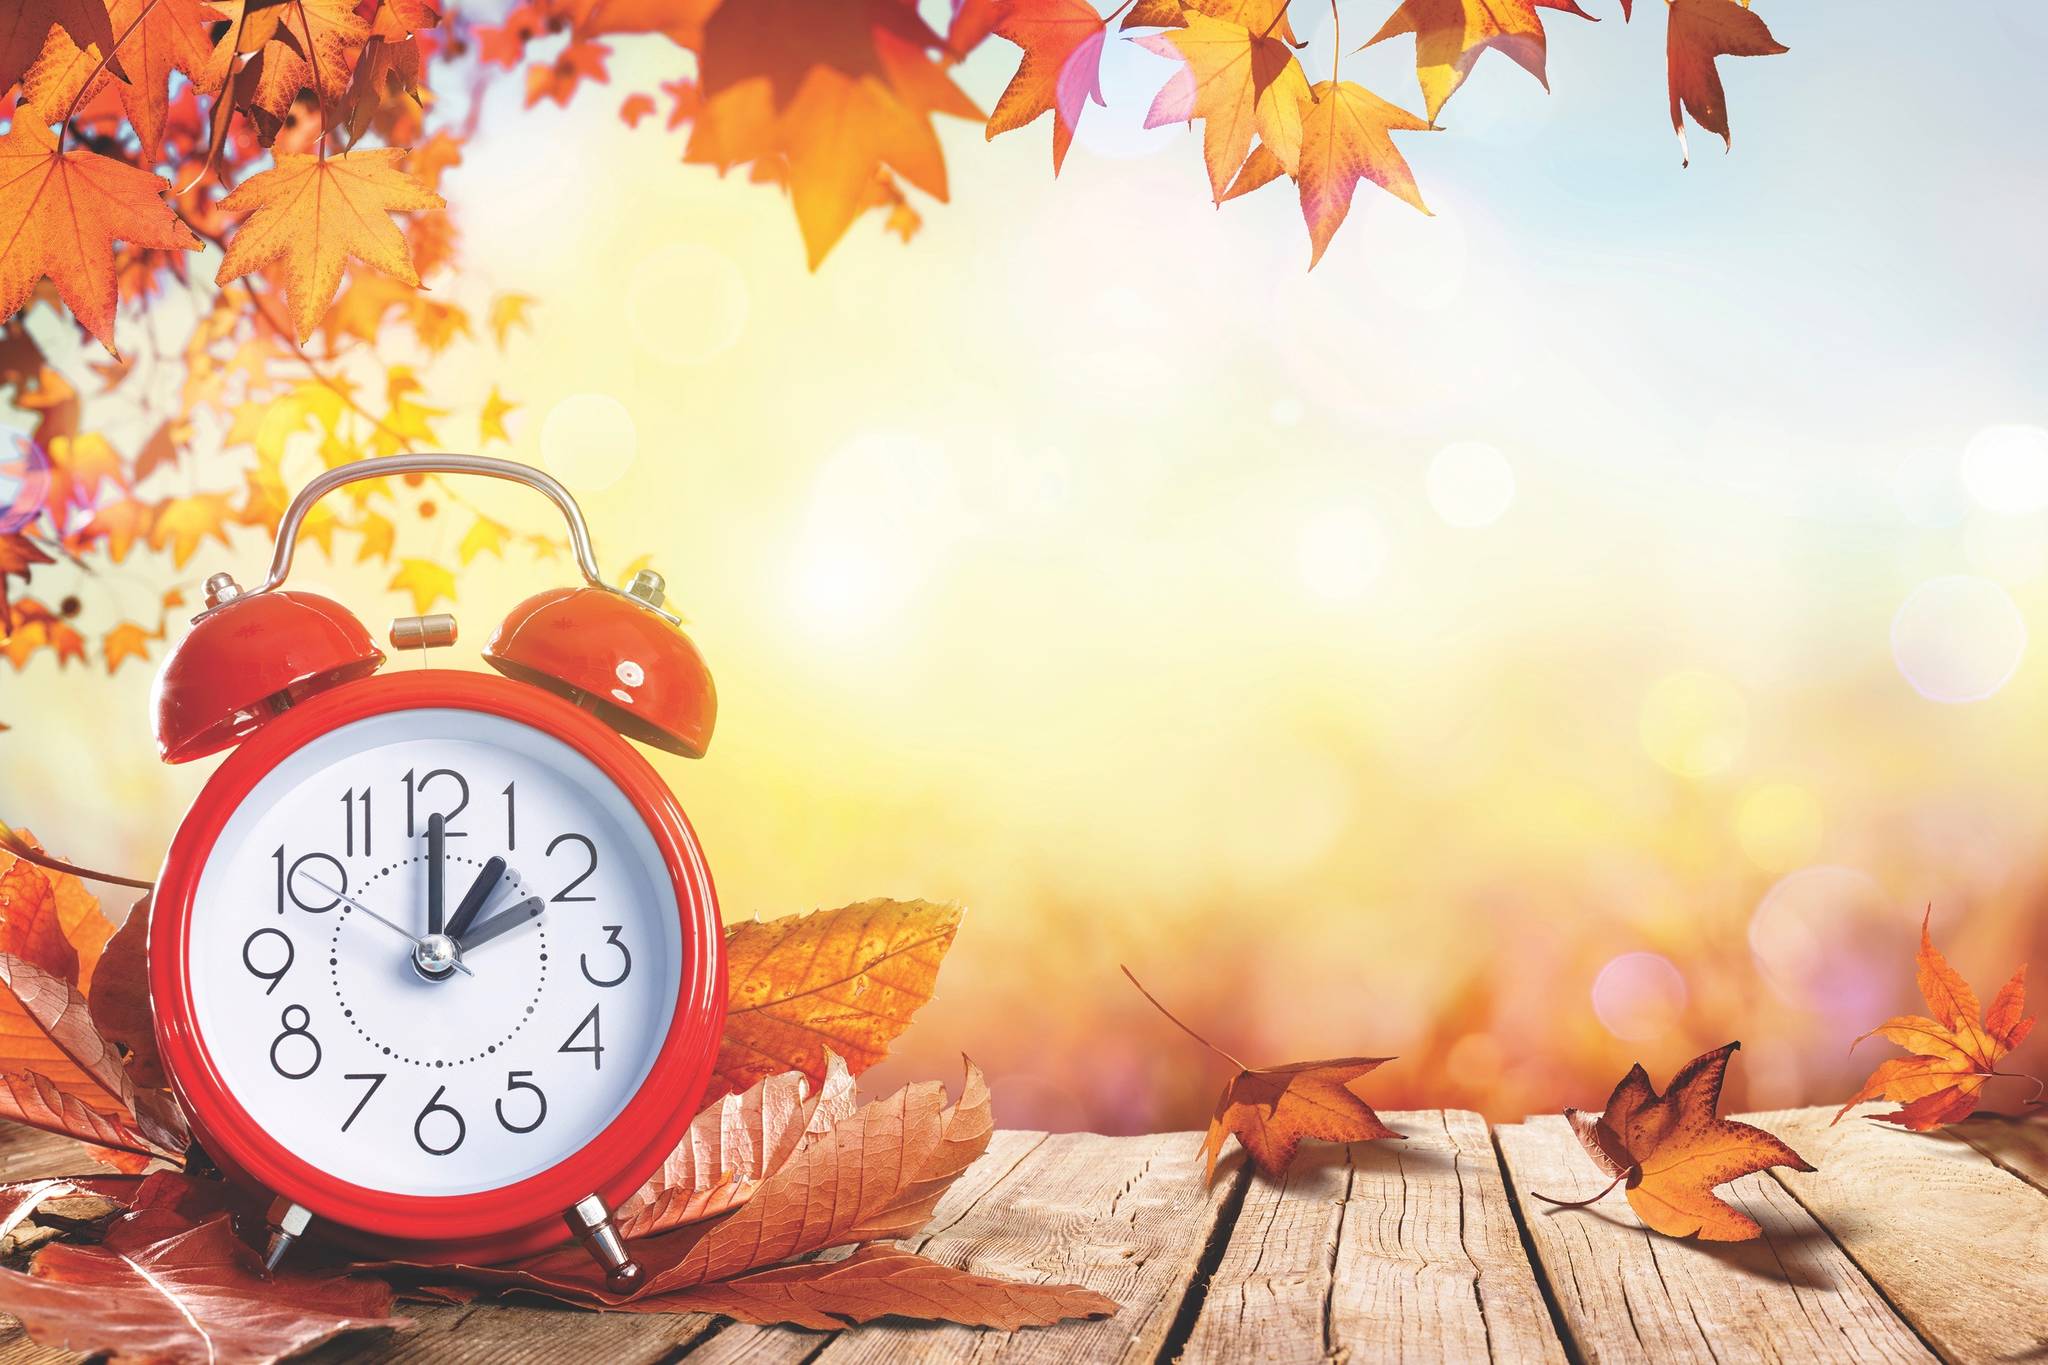 Time to “fall back” by setting clocks back one hour on Sunday, Nov. 3.